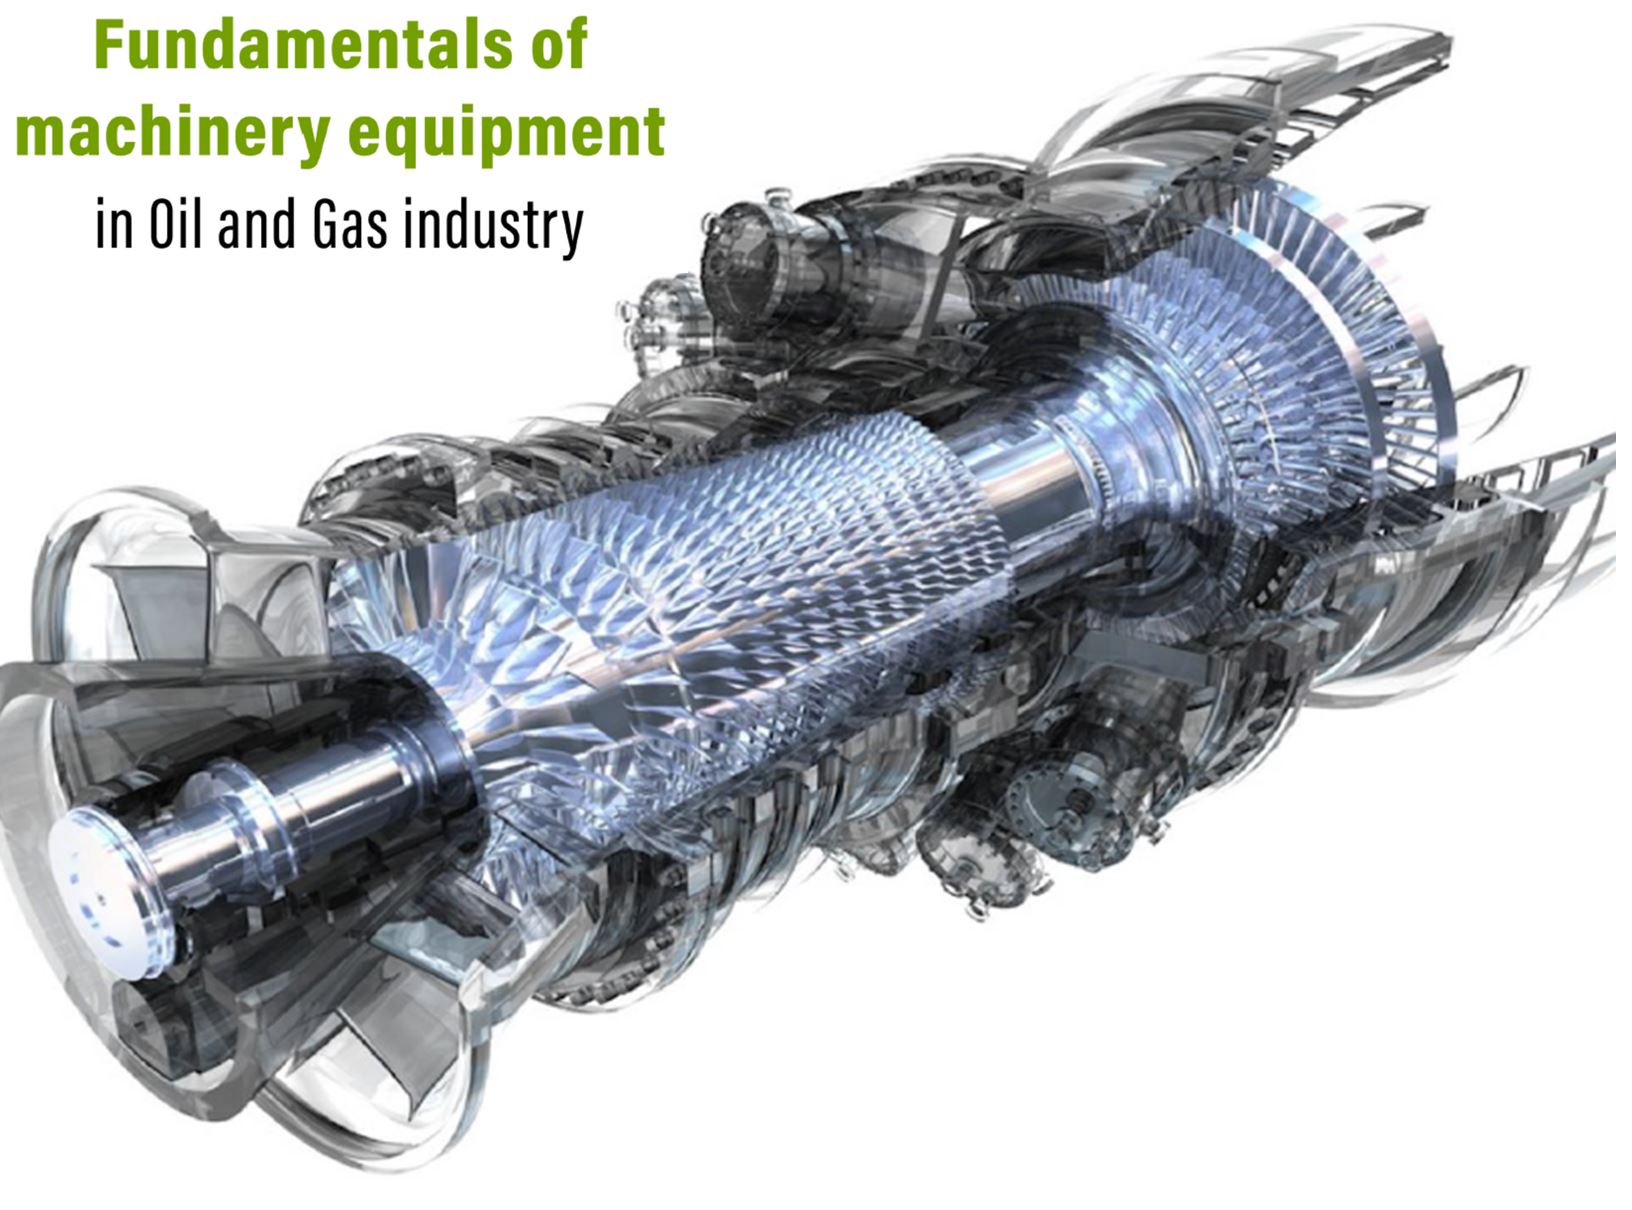 Fundamentals of Machinery Equipment in Oil and Gas Industry